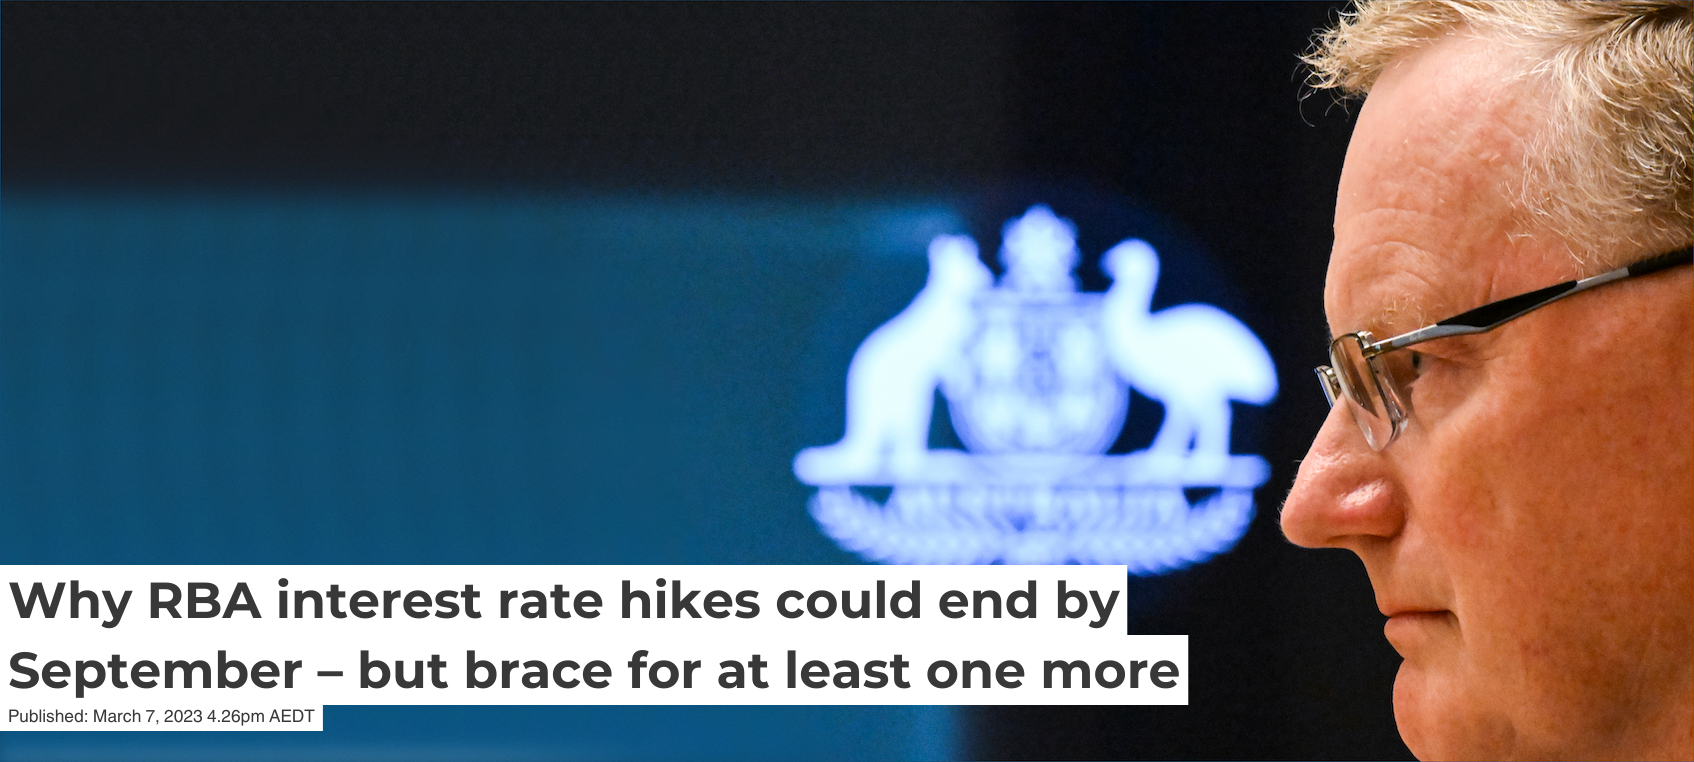 Why RBA interest rate hikes could end by September